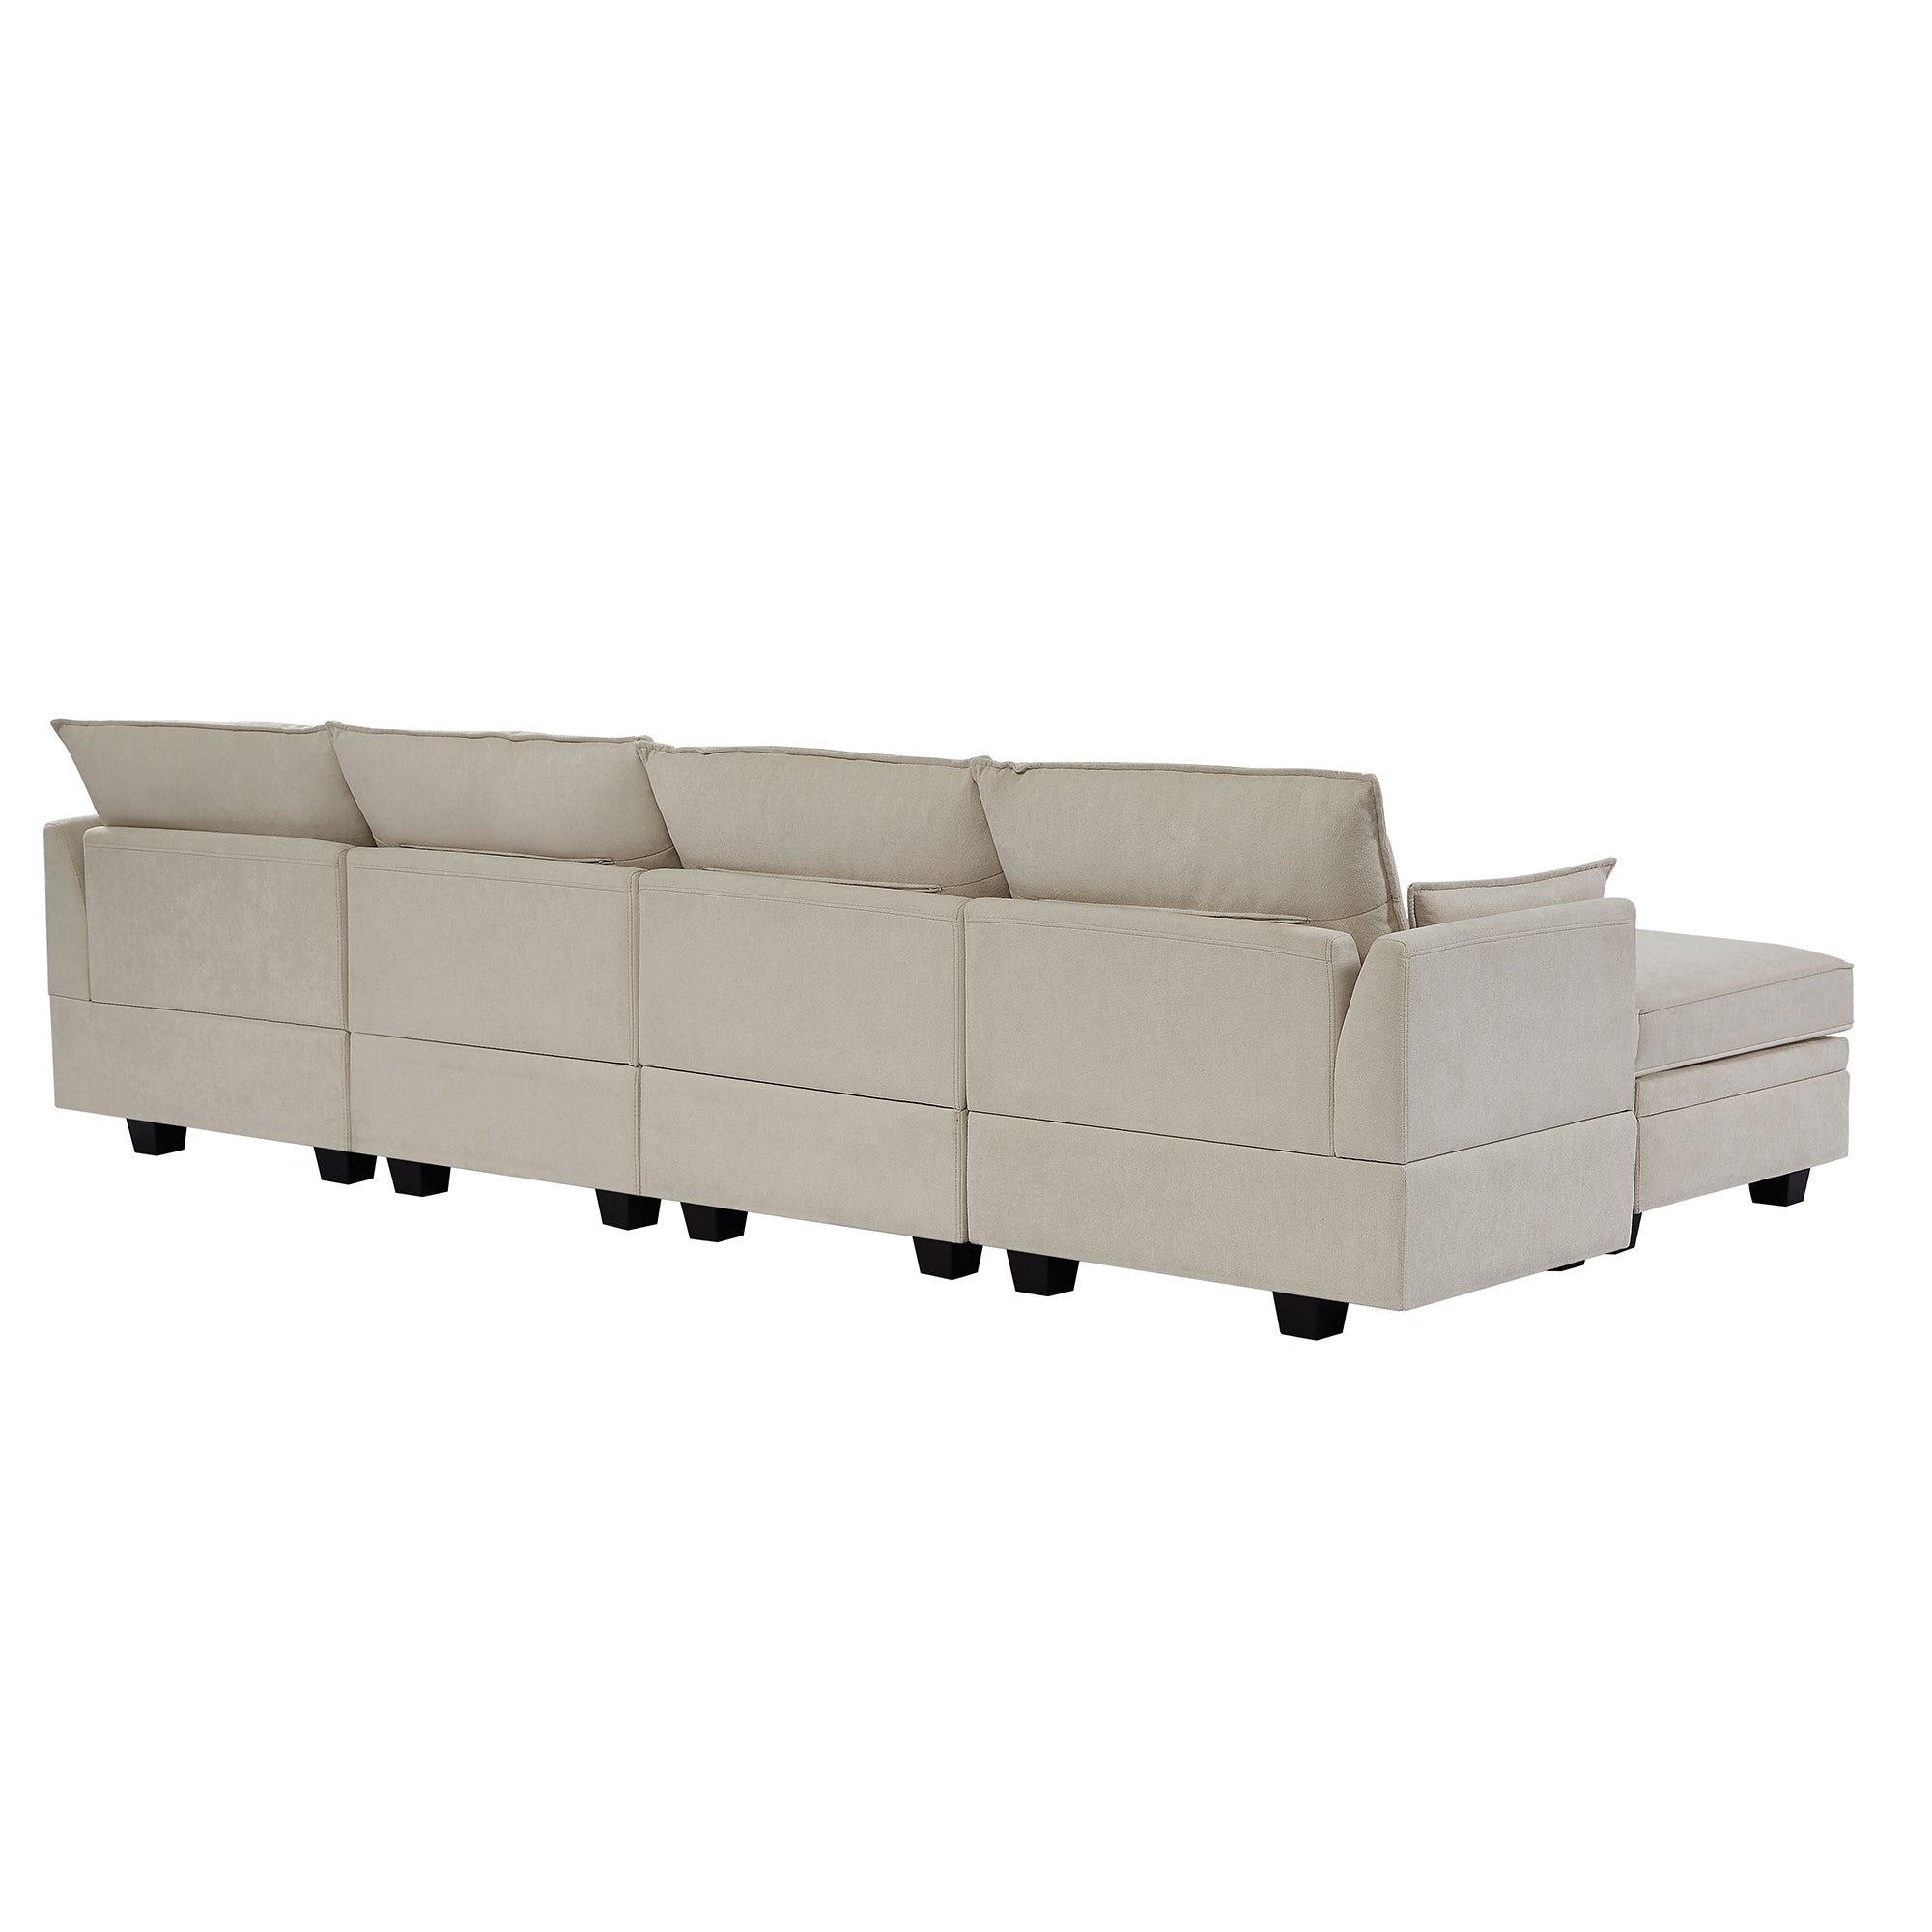 Bellemave 115" Modern Large U-Shape Modular Sectional Sofa, Convertible Sofa Bed with Reversible Chaise